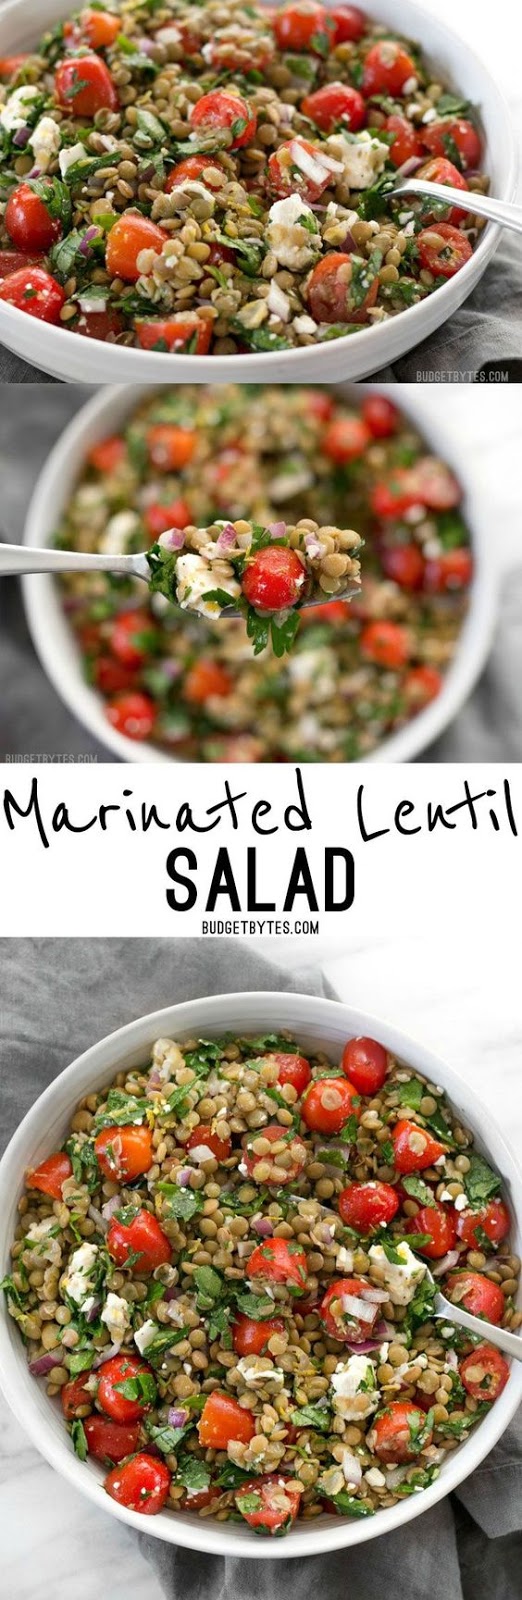 Marinated Lentil Salad is bright and flavorful, and infused with bold flavors like garlic and lemon.